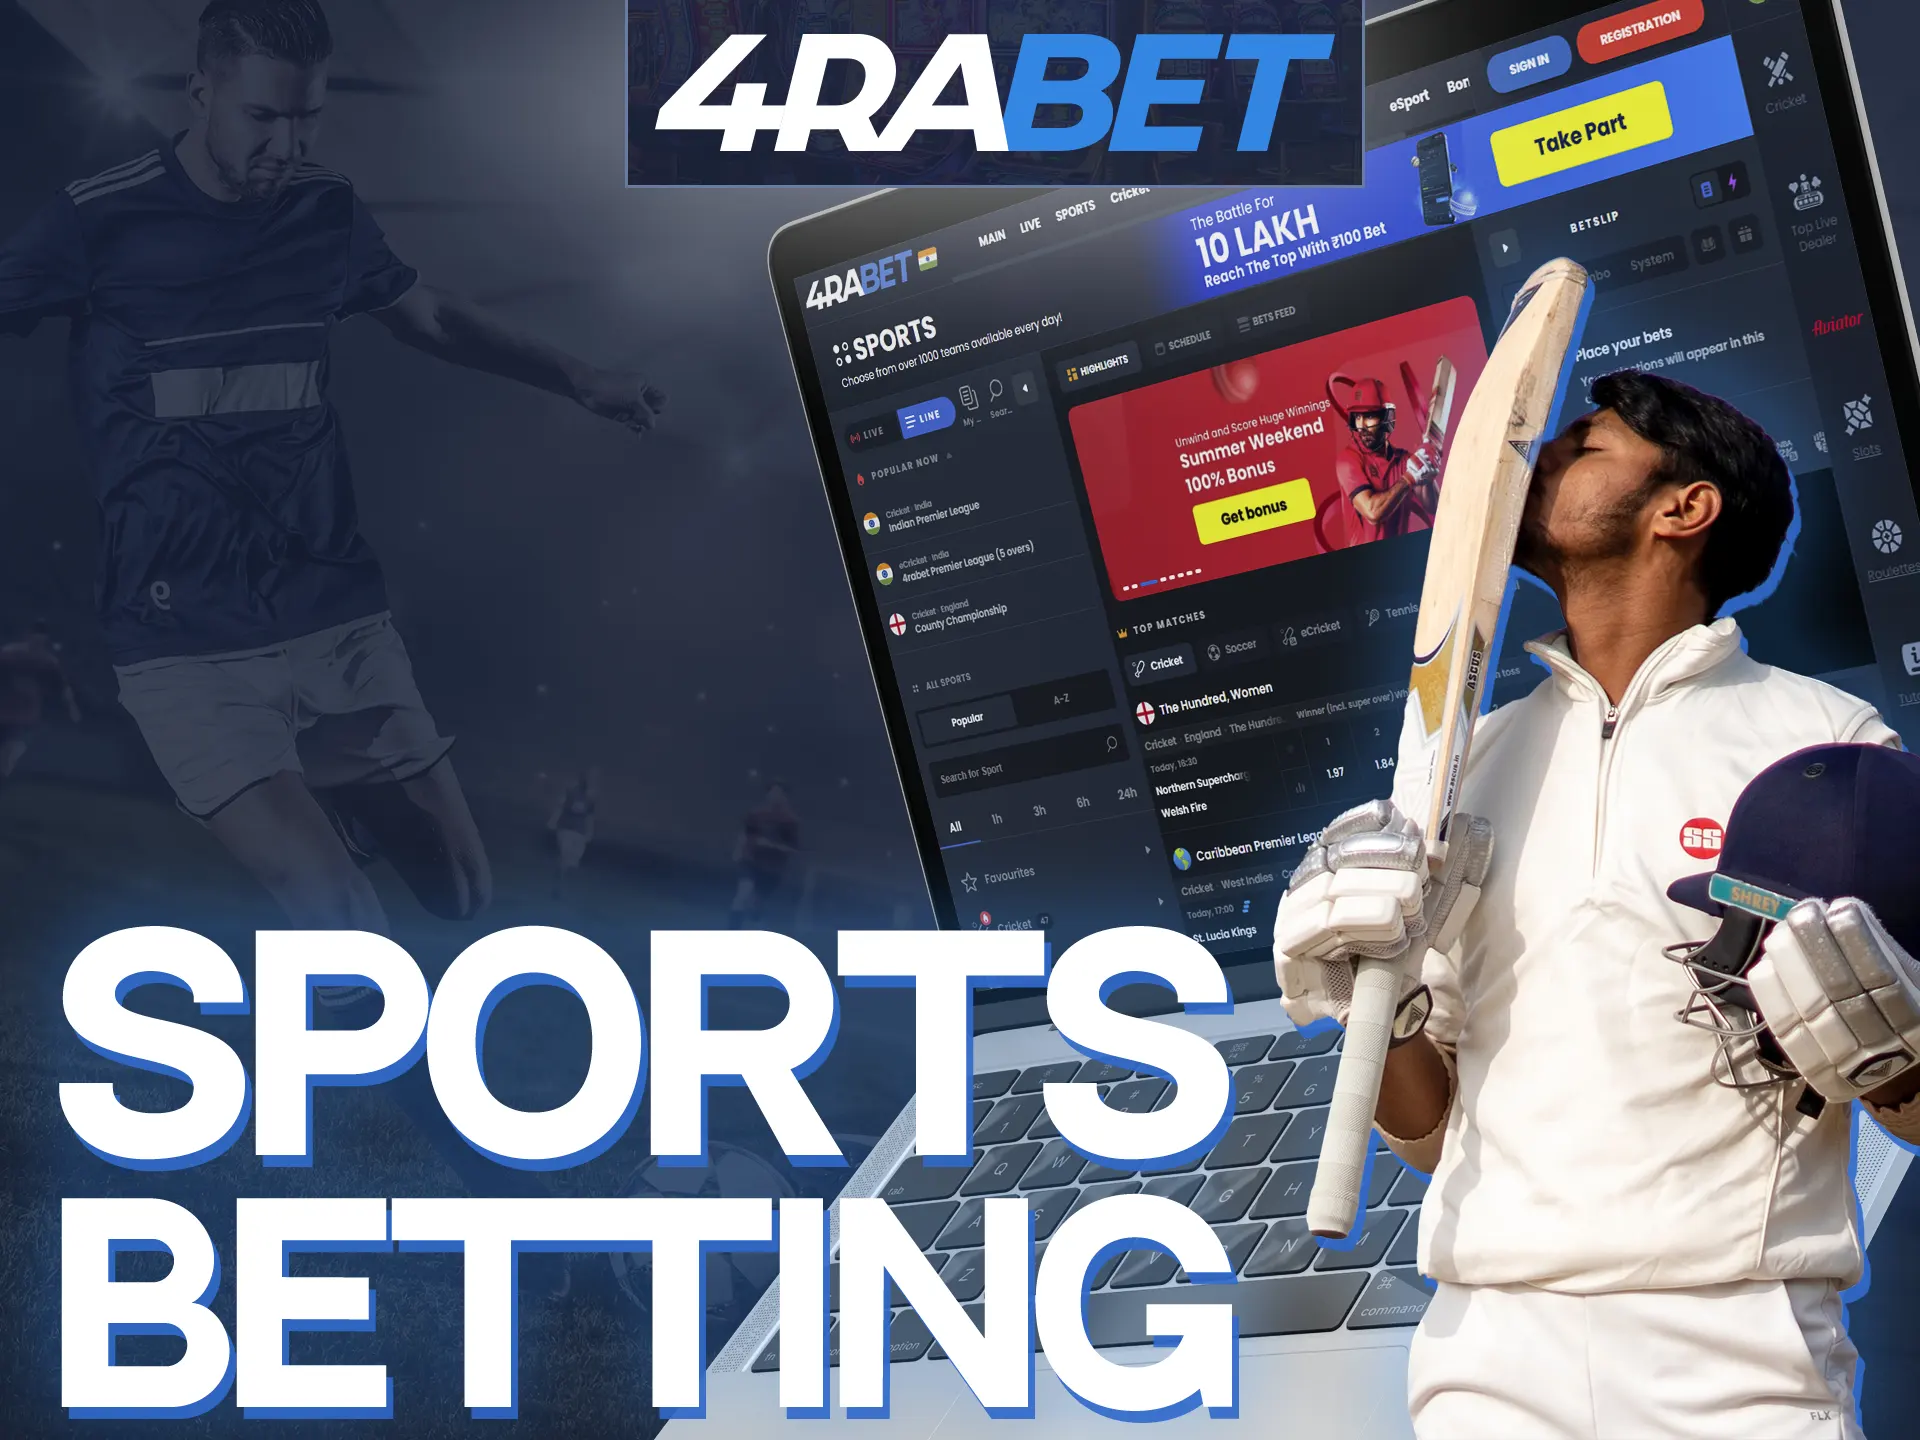 Bet on sporting events with 4Rabet.